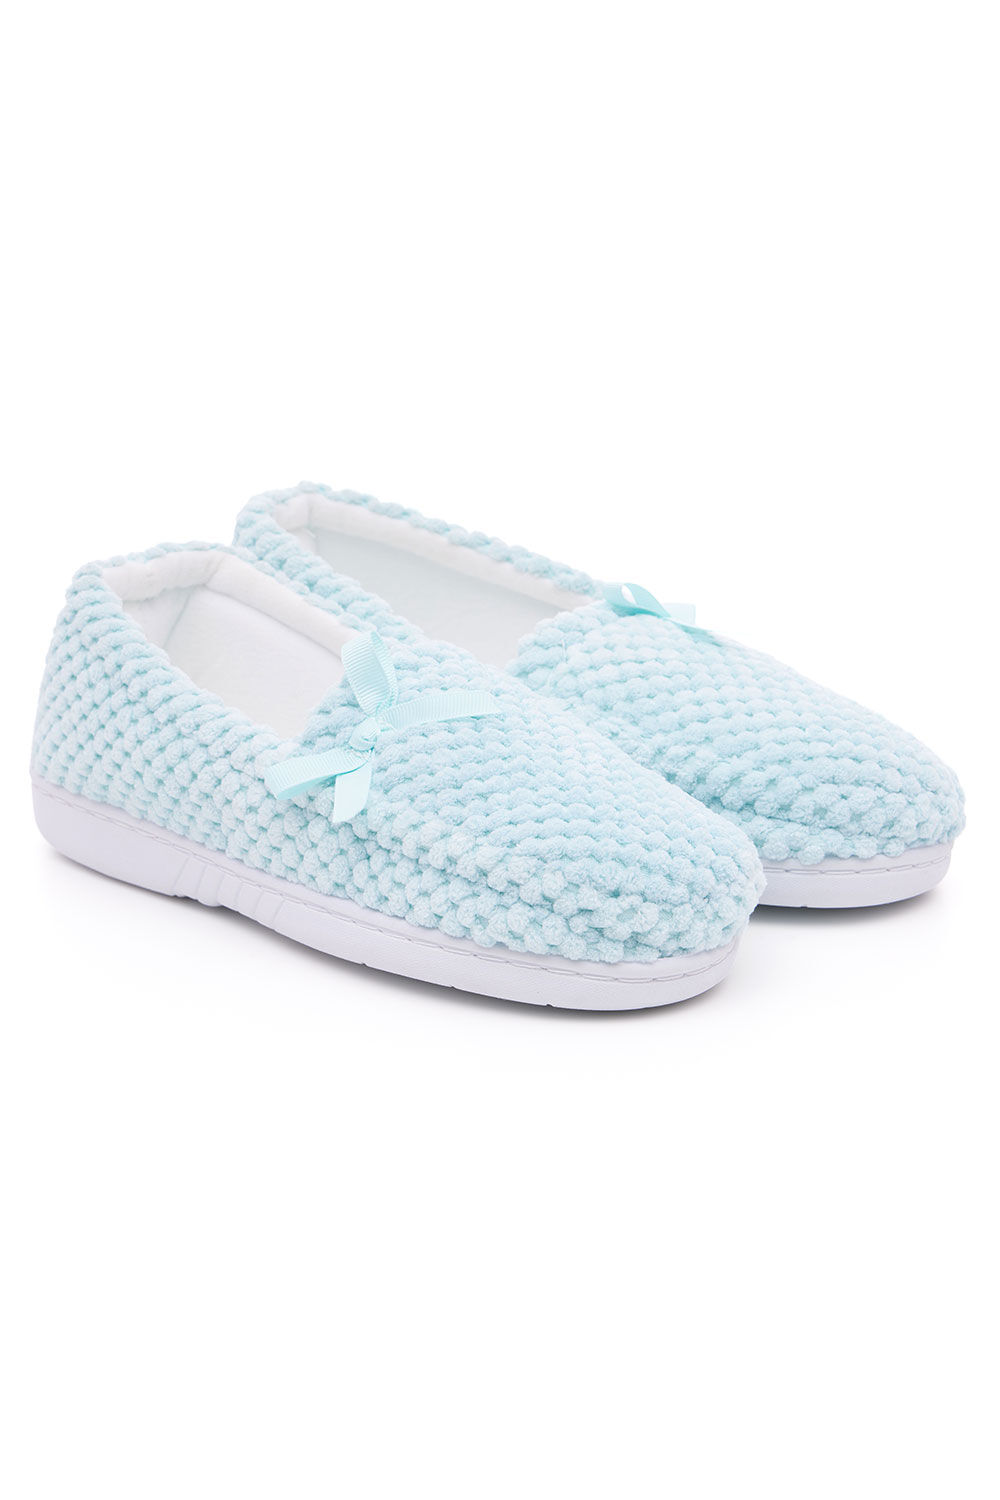 Bonmarche Blue Fleece Moccasin Slippers With Bow Detail, Size: 4